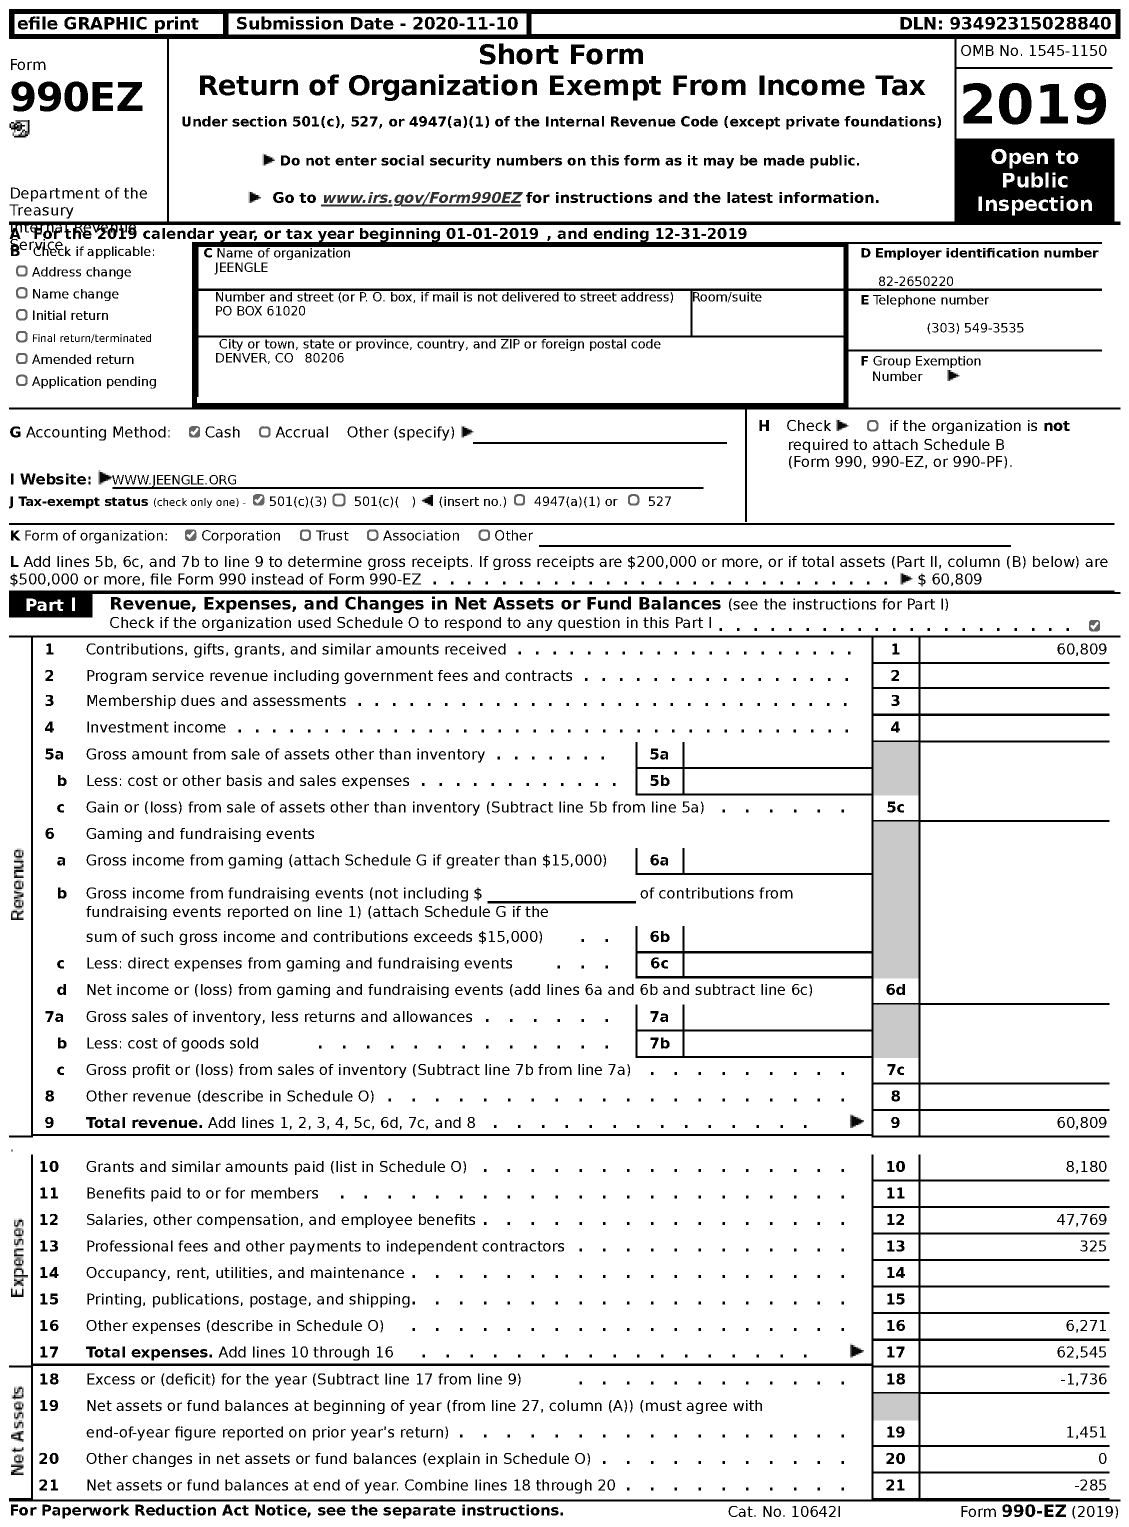 Image of first page of 2019 Form 990EZ for Jeengle